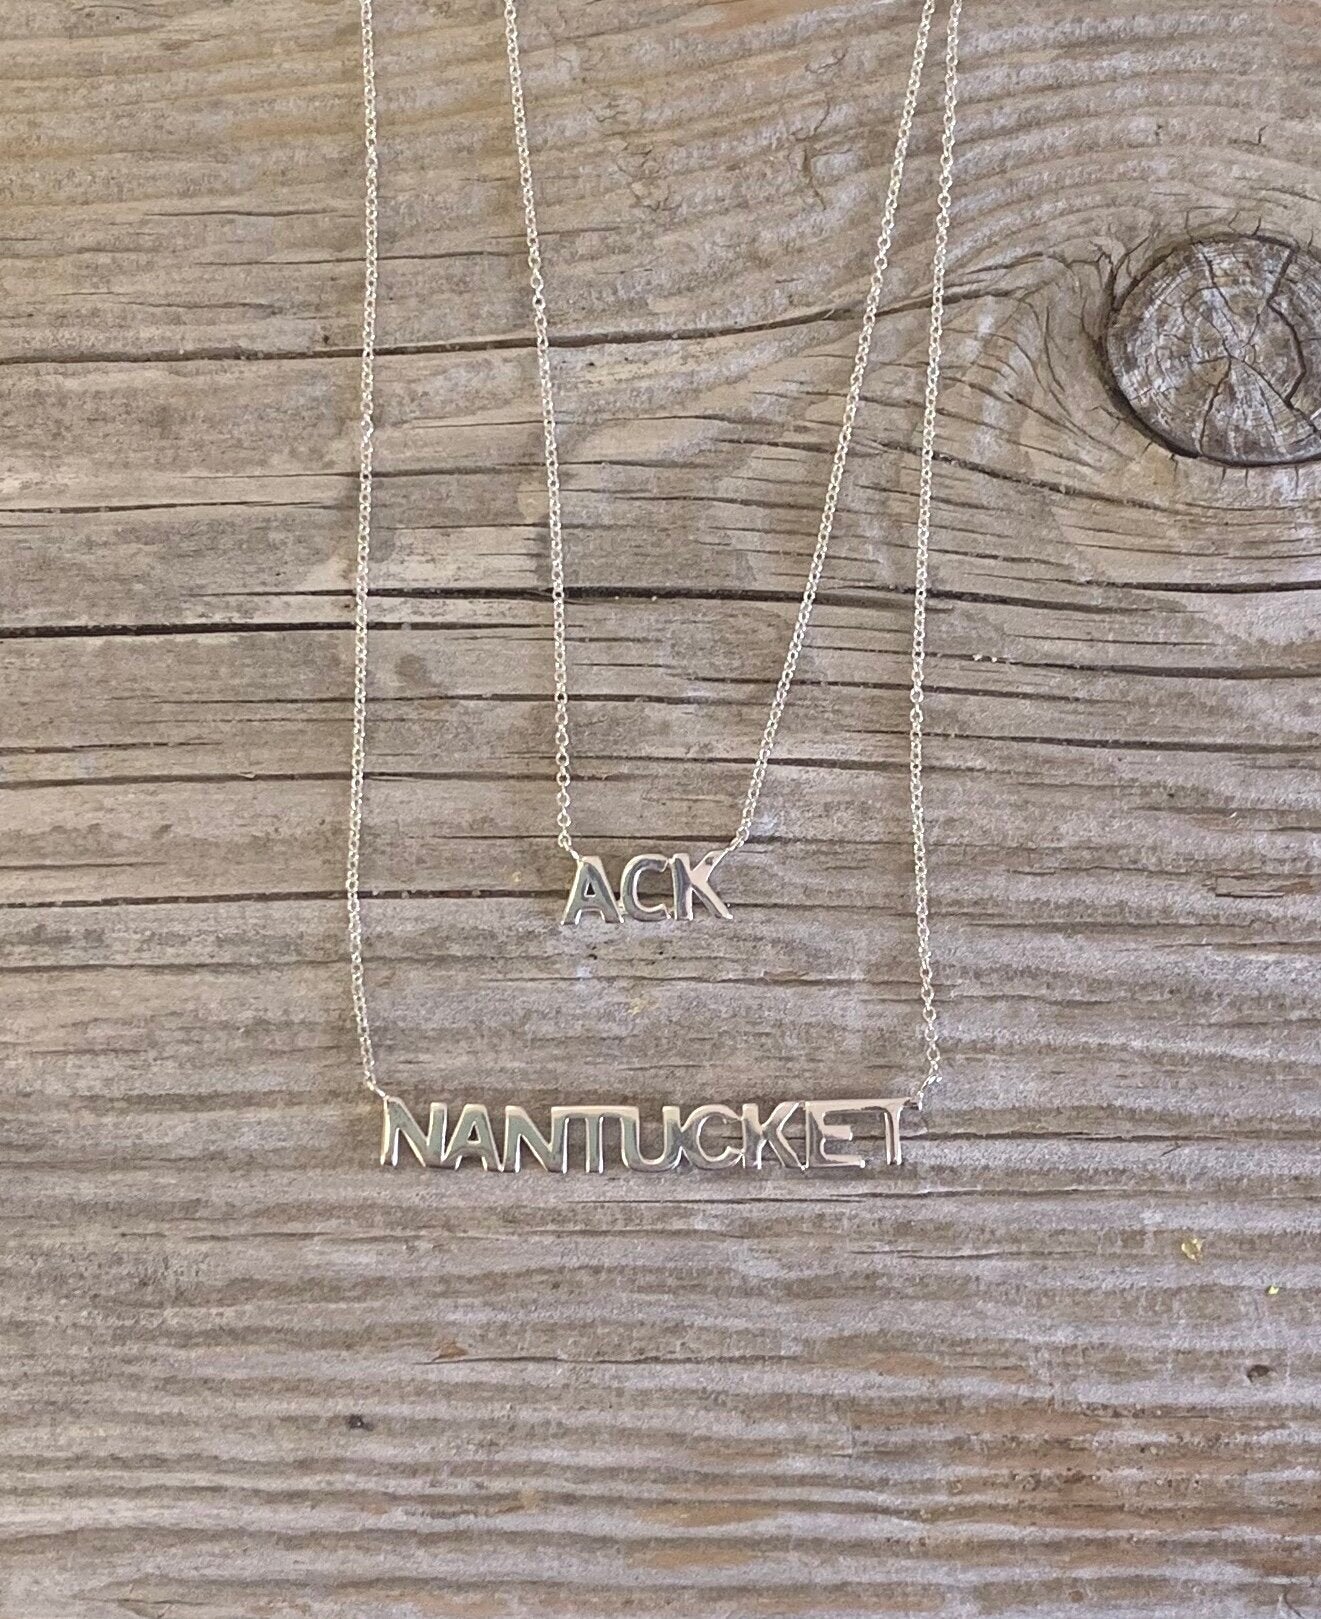 Sterling Silver "Nantucket" Necklace handmade by Jewel in the Sea Nantucket